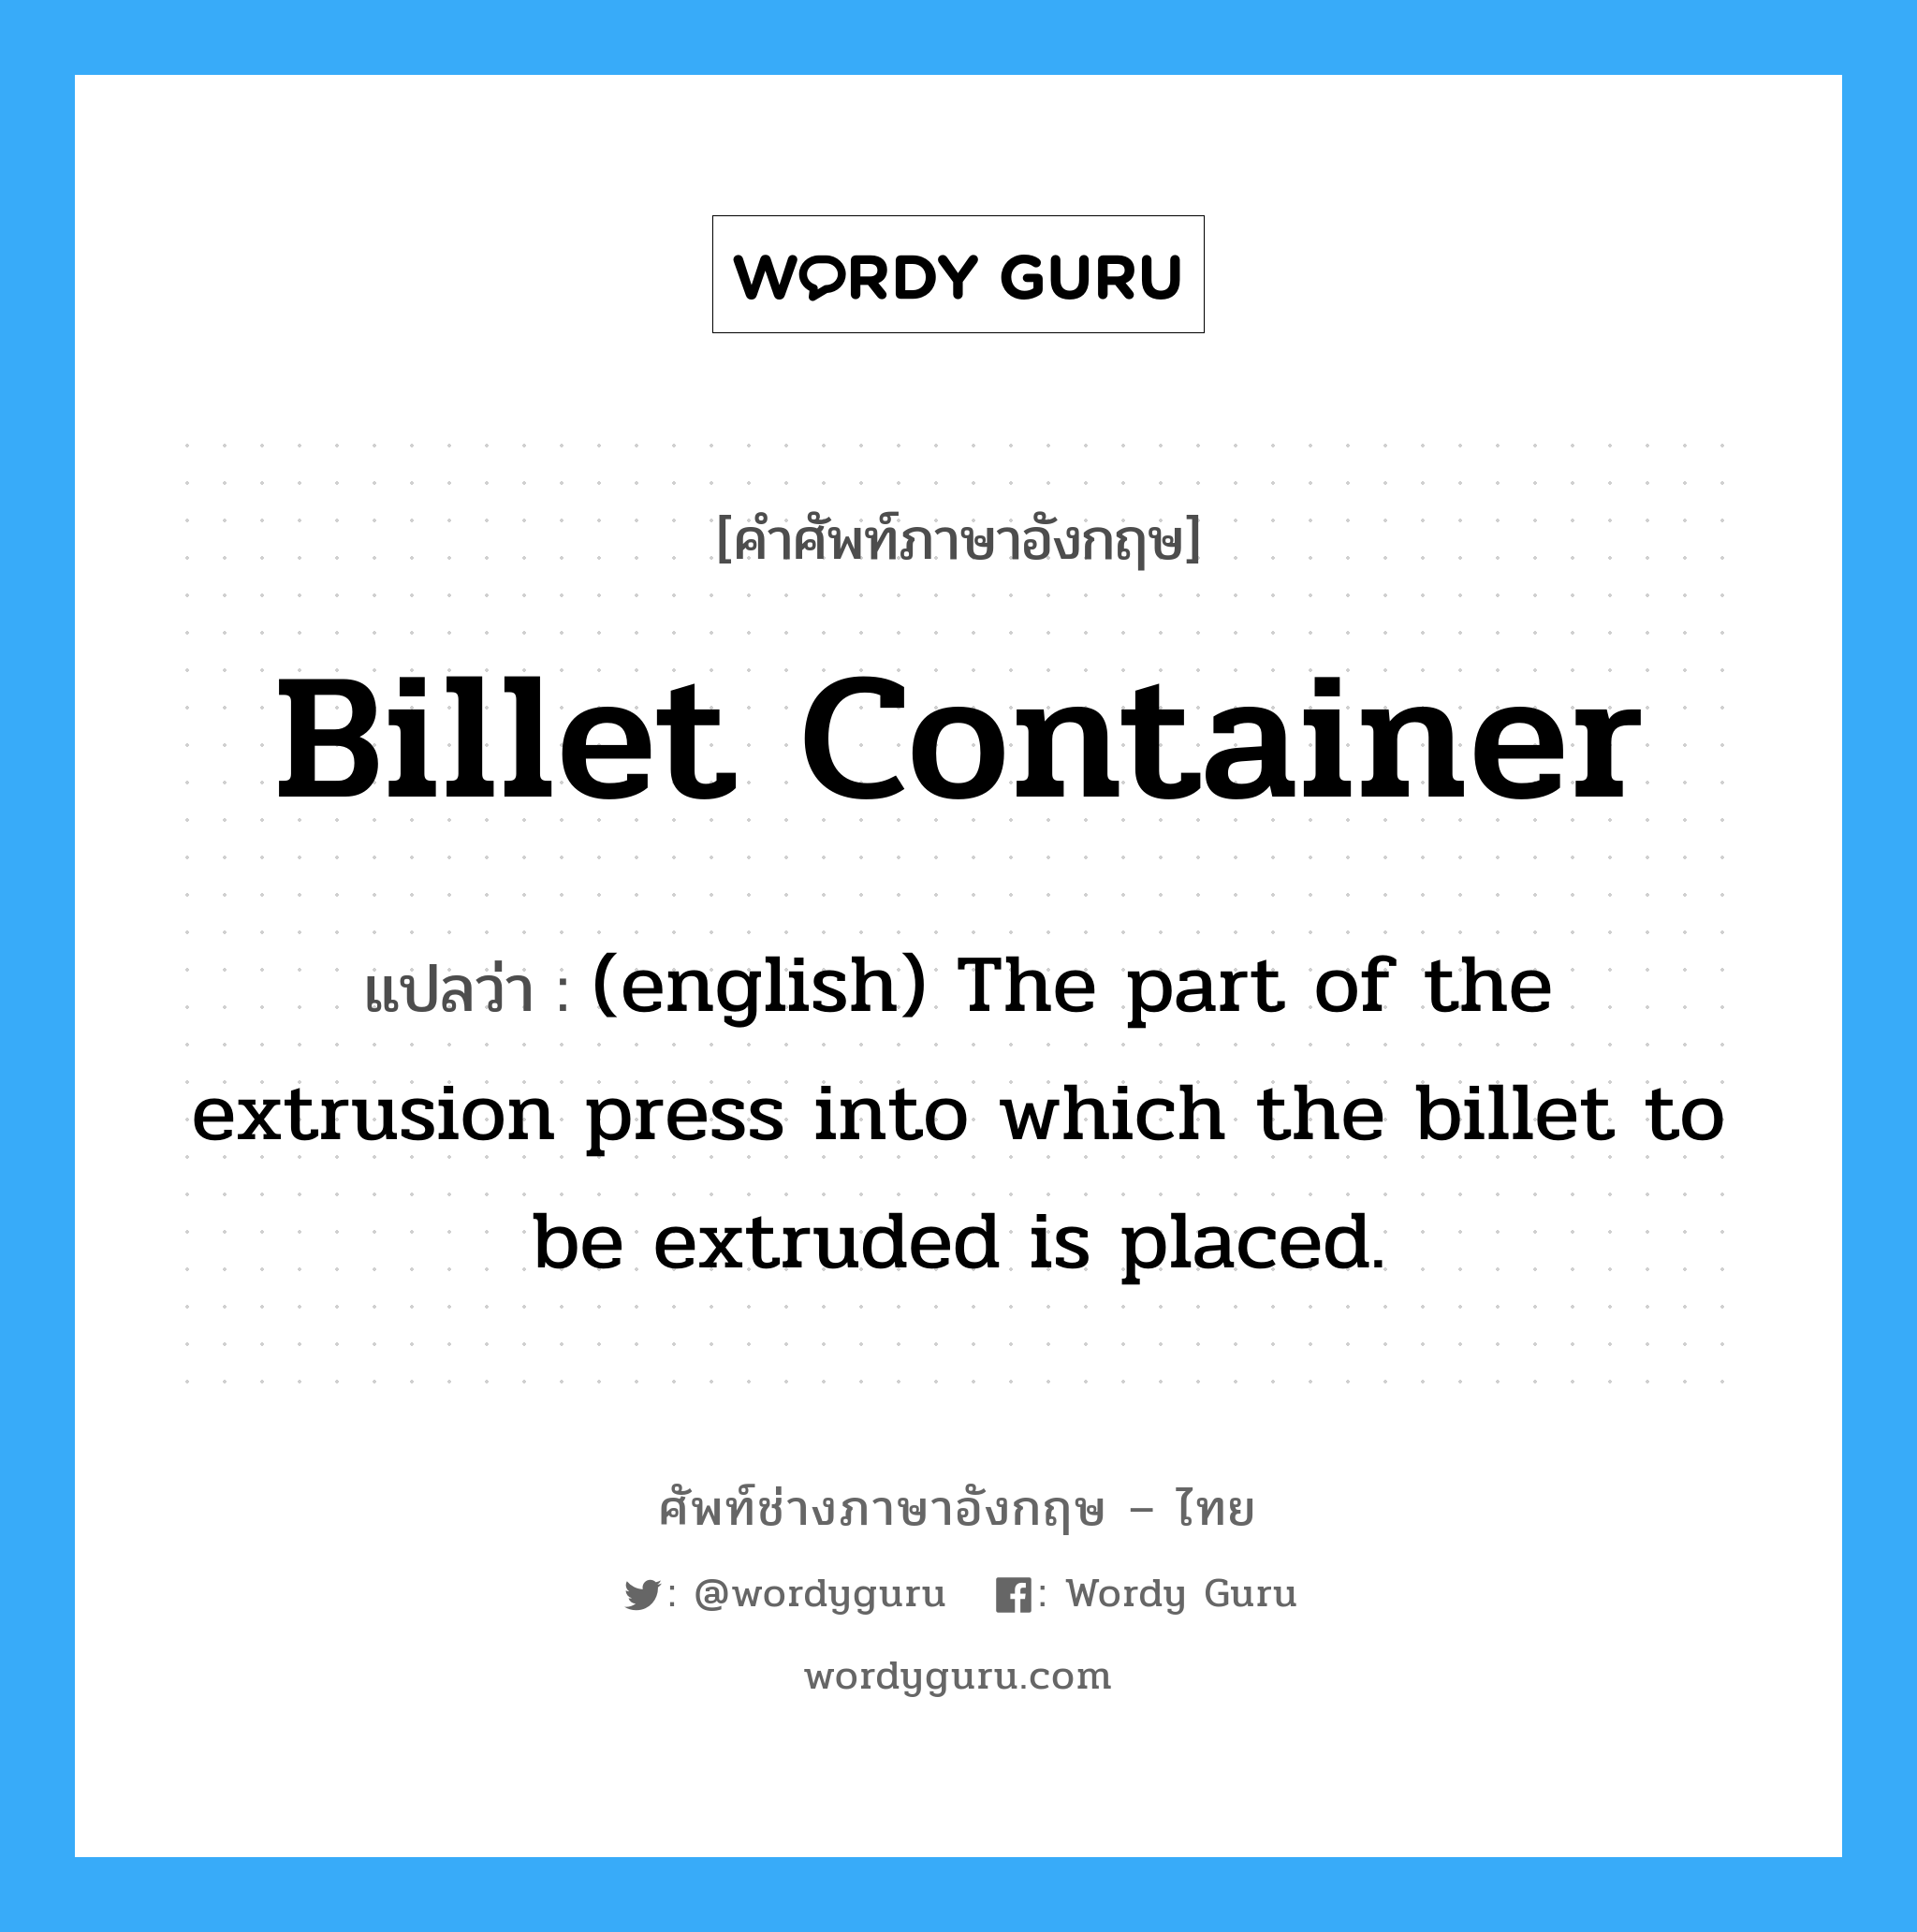 Billet container แปลว่า?, คำศัพท์ช่างภาษาอังกฤษ - ไทย Billet container คำศัพท์ภาษาอังกฤษ Billet container แปลว่า (english) The part of the extrusion press into which the billet to be extruded is placed.